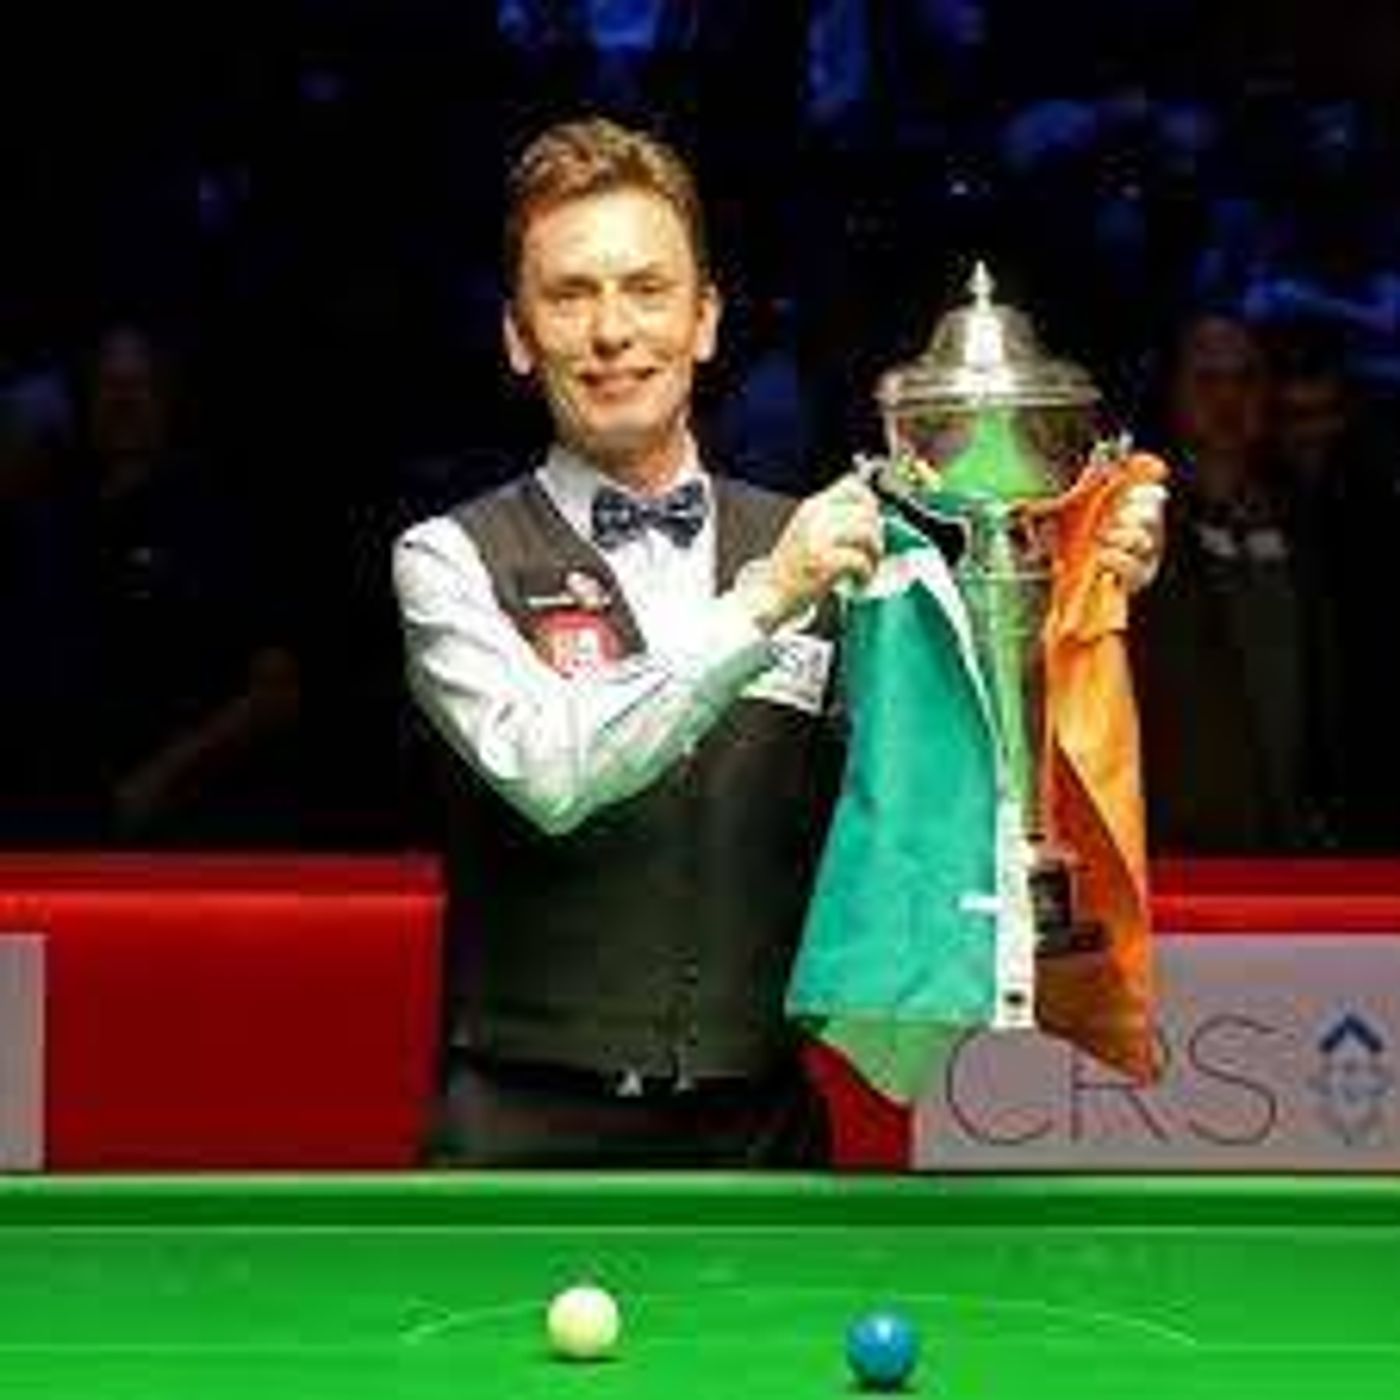 10: Ken Doherty: I visualised lifting the world snooker trophy